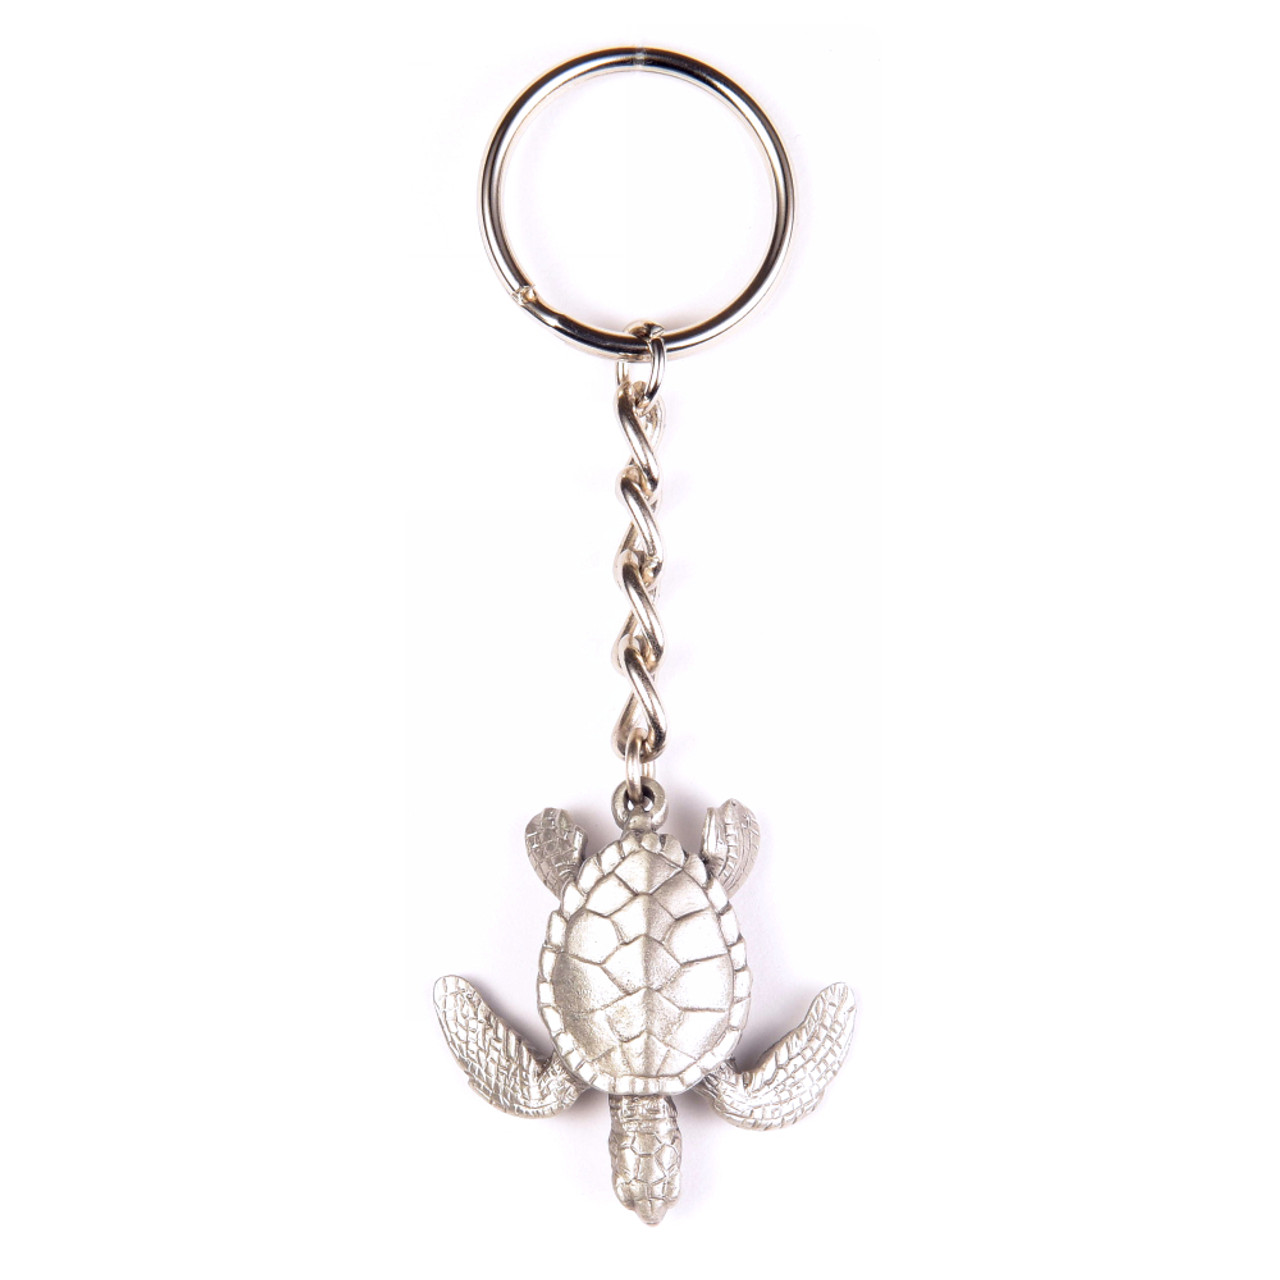 Turtle Keychain for Men and Women- Sea Turtle Key Fob, Gift for